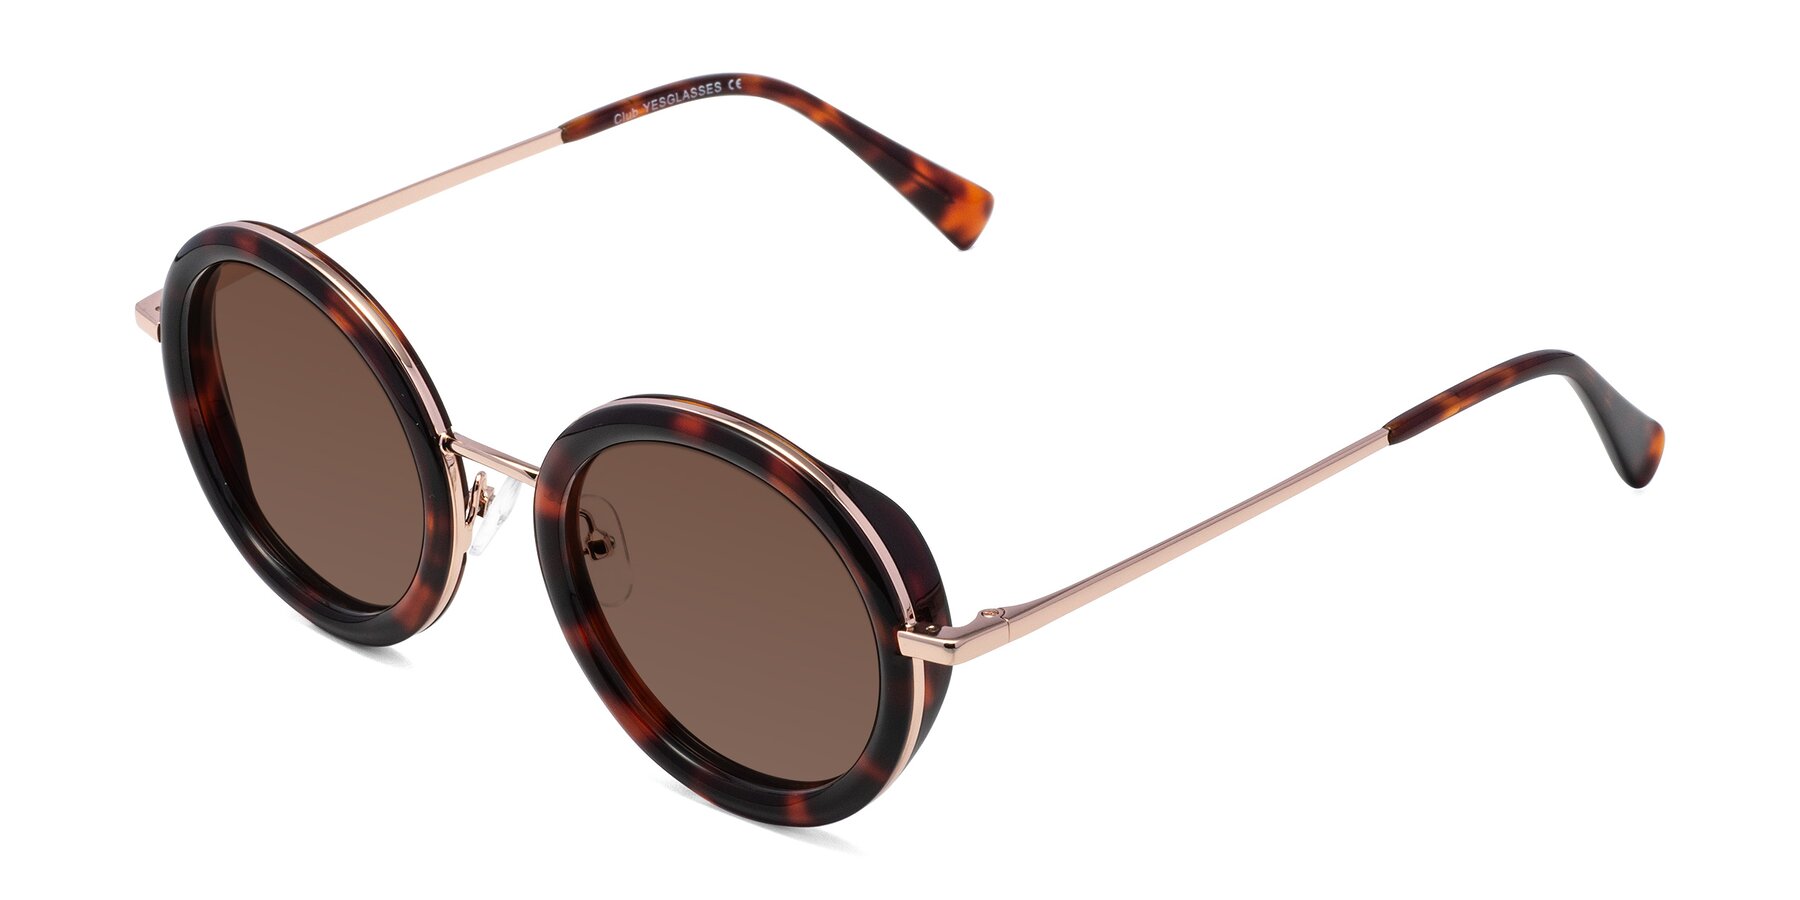 Angle of Club in Tortoise-Rose Gold with Brown Tinted Lenses